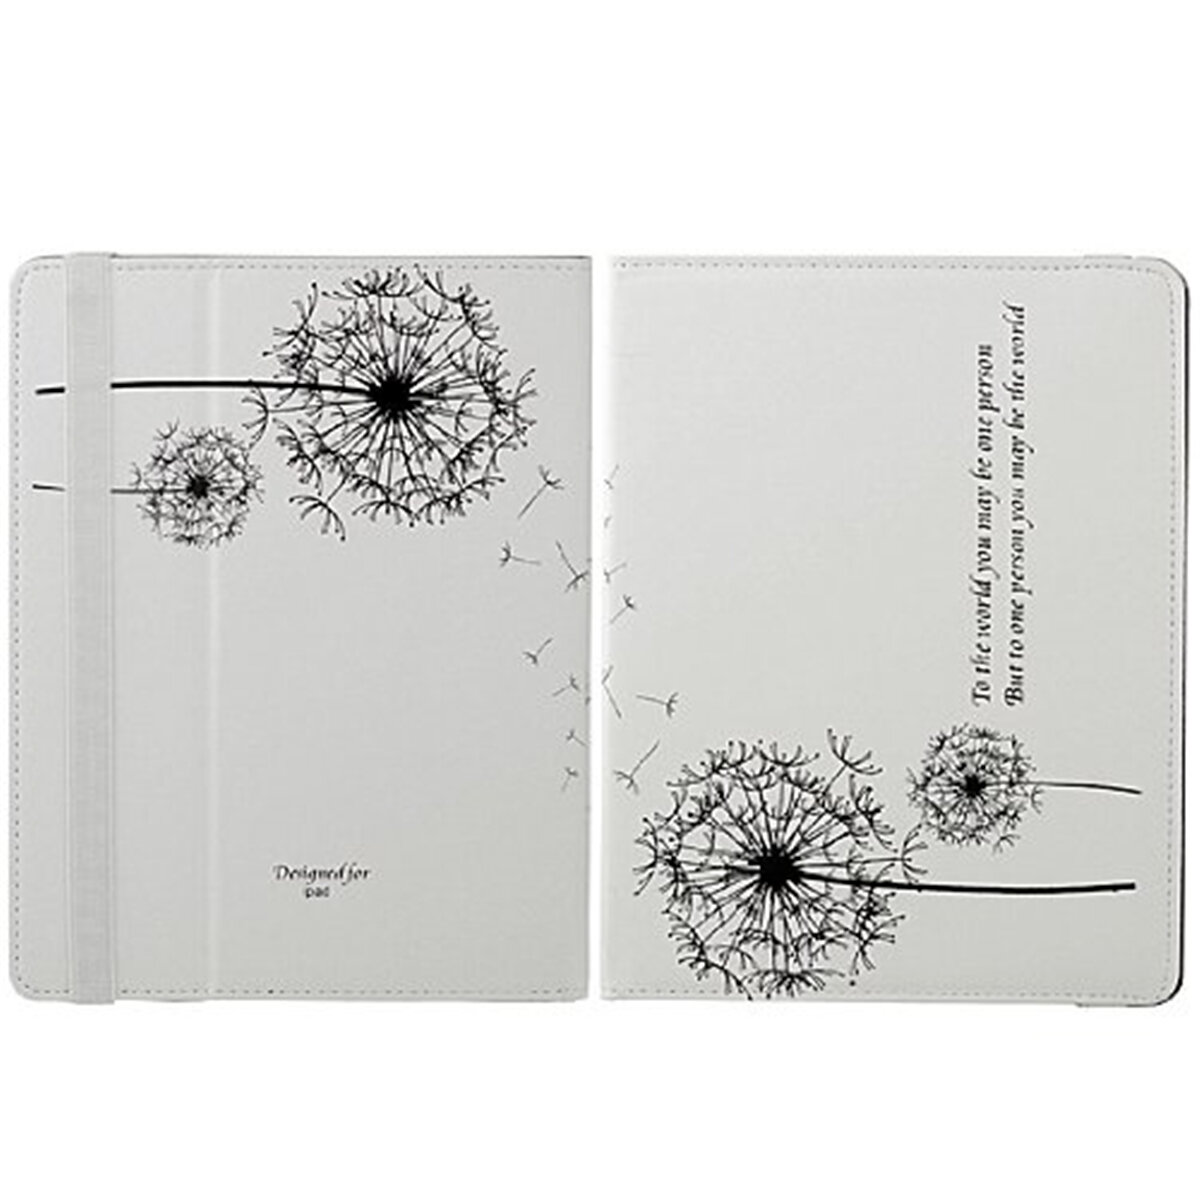 PU Leather Folio Case Cover Stand For iPad 2/3/4 COD